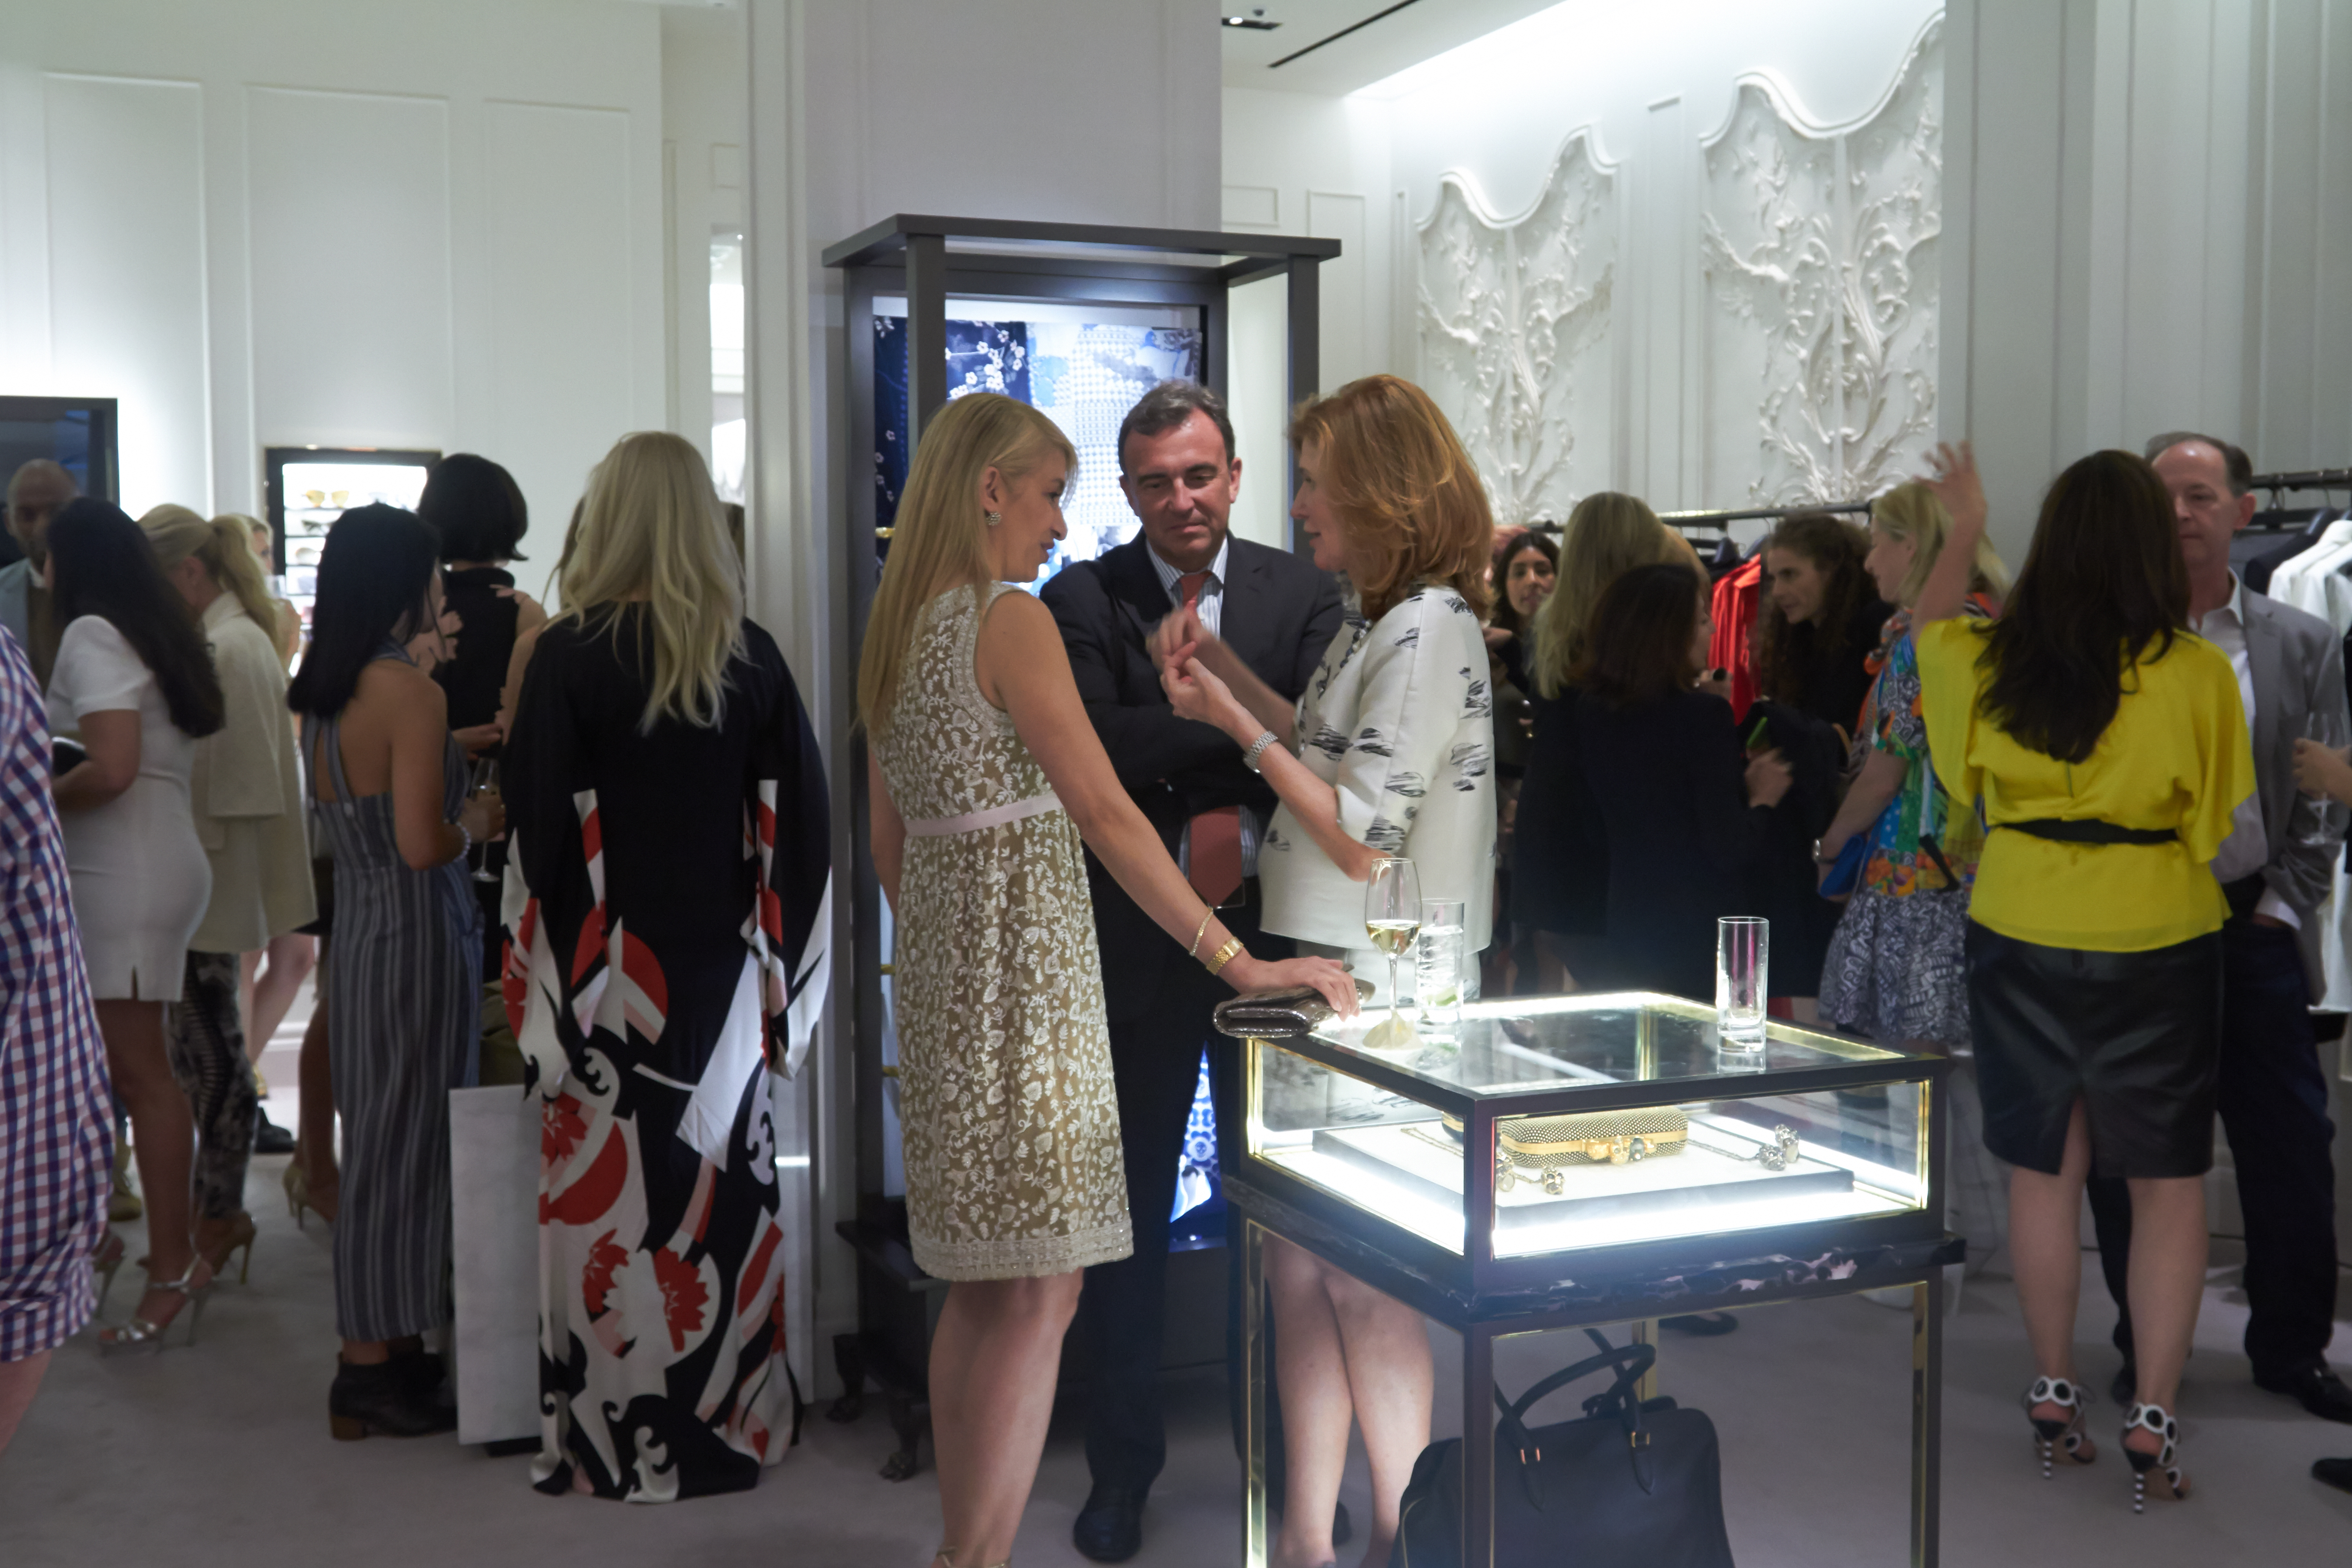 Guests chat and take in the stunning fashion on display during the reception.